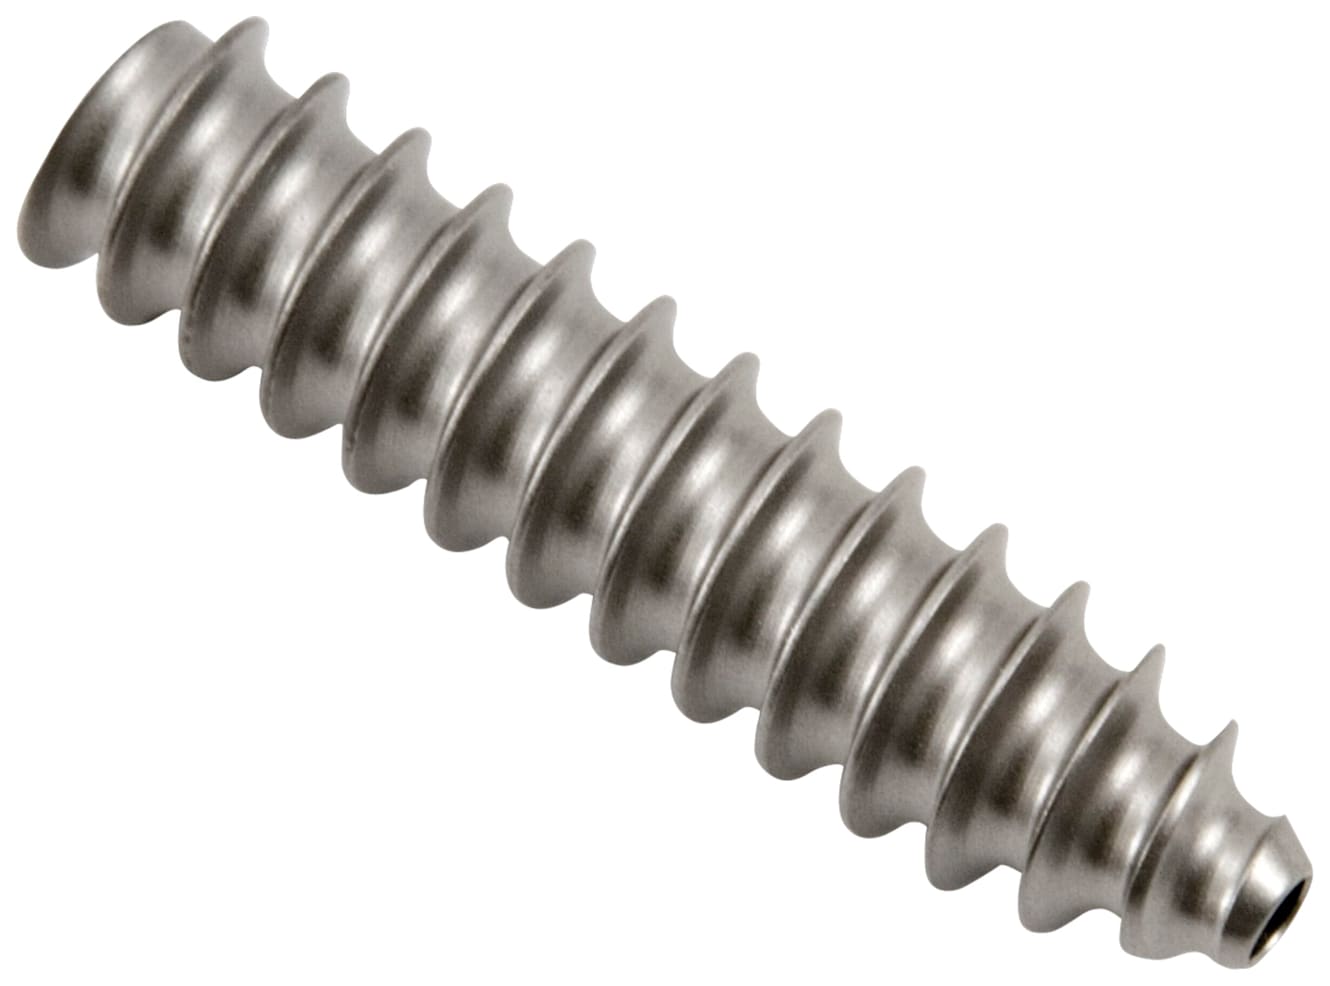 Screw, Cannulated Interference, Full Thread 7 x 30 mm